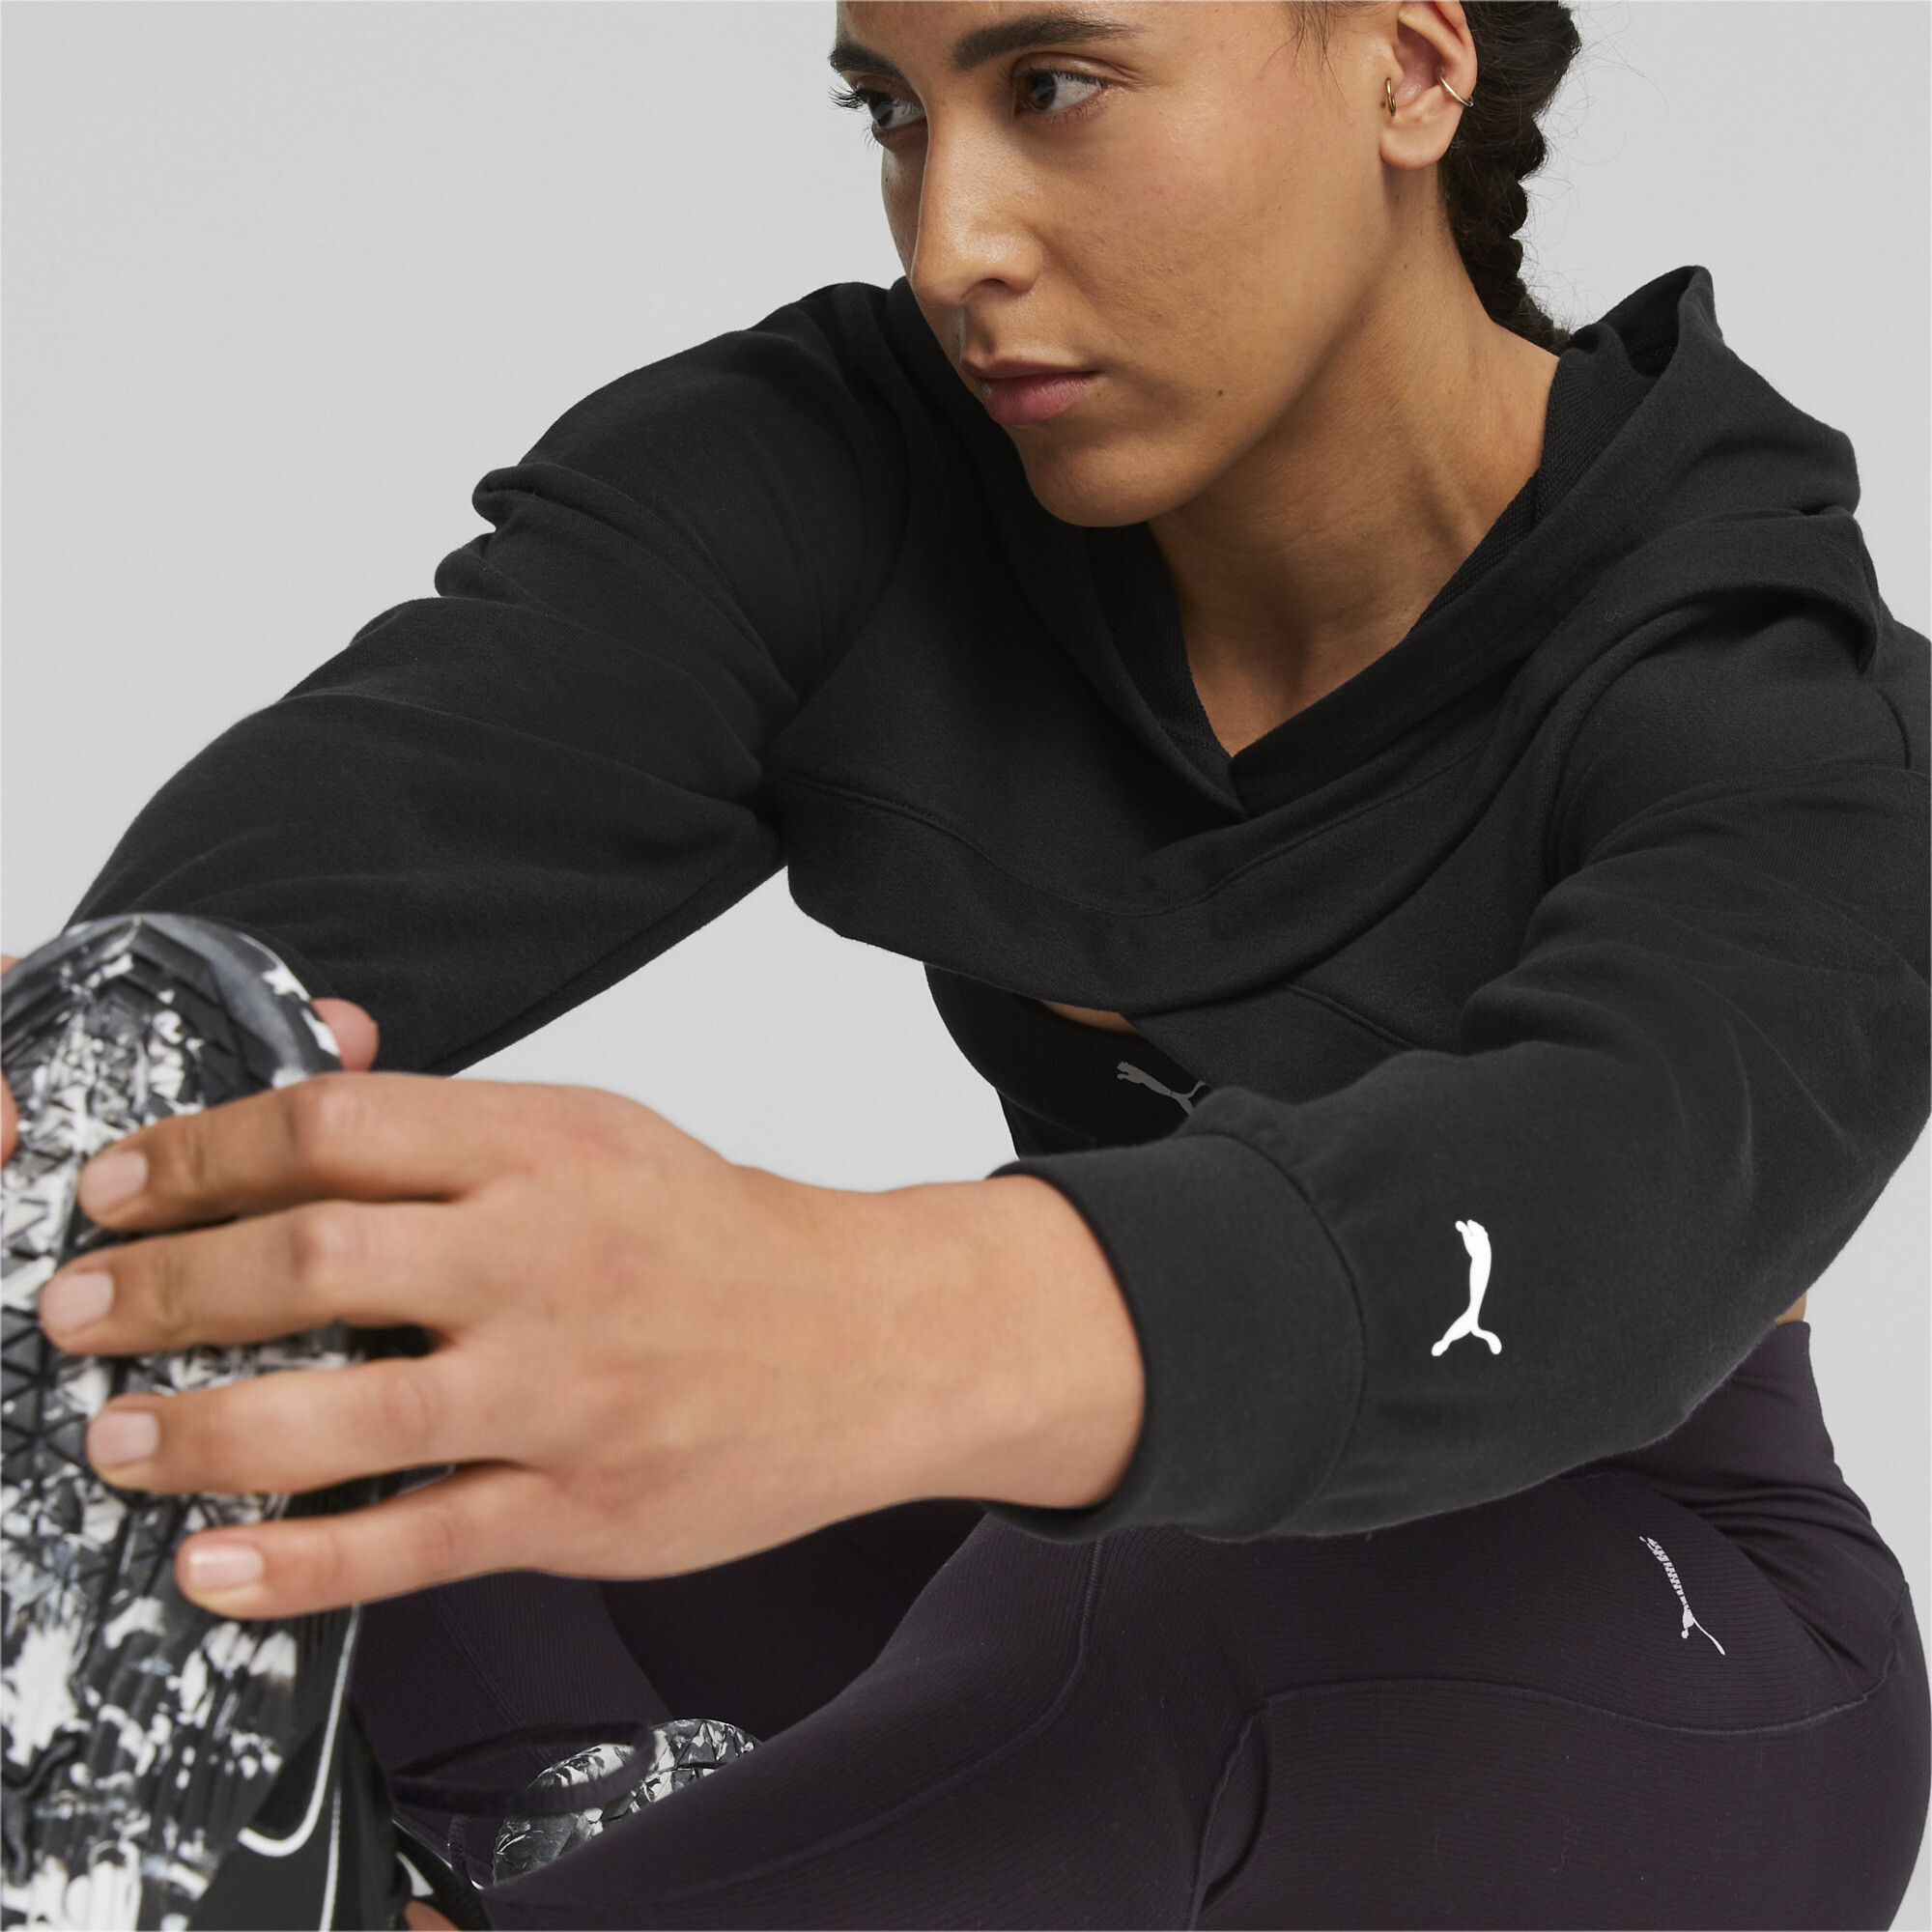 Women's PUMA FIT MOVE Cropped Training Hoodie In Black, Size Small